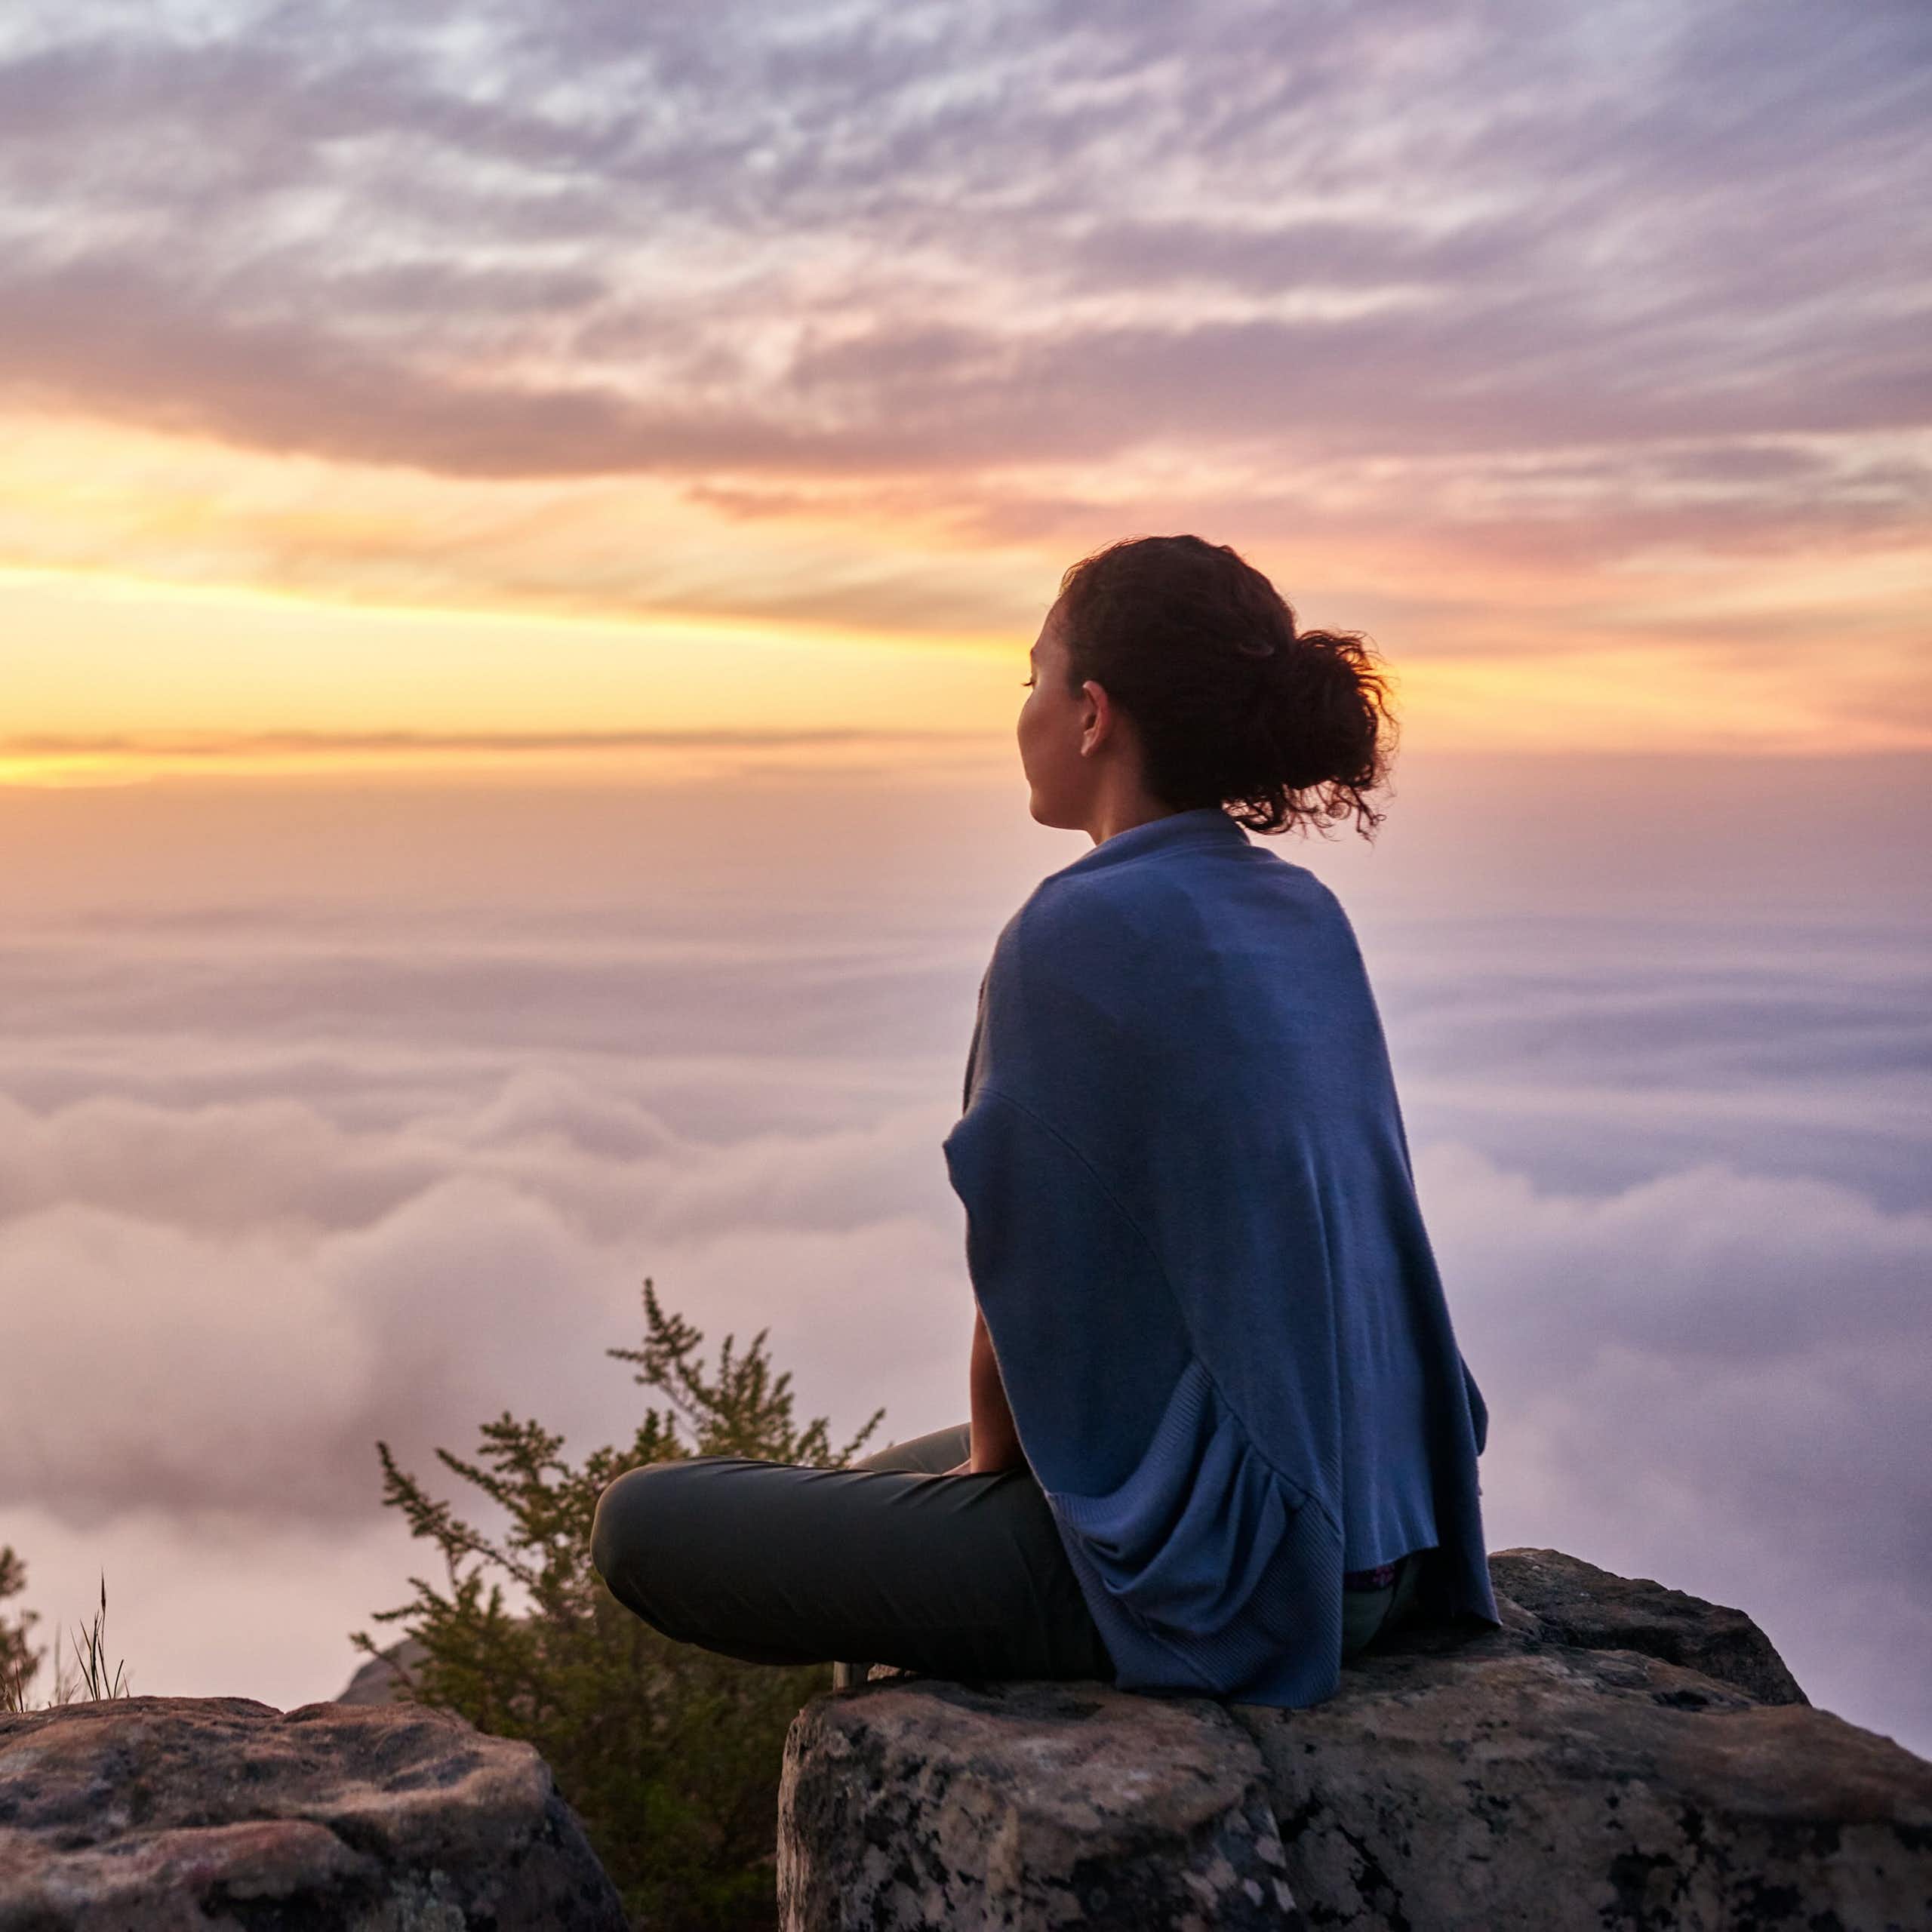 Photo of a woman sitting on top of a mountain looking out a sunrise over clouds.